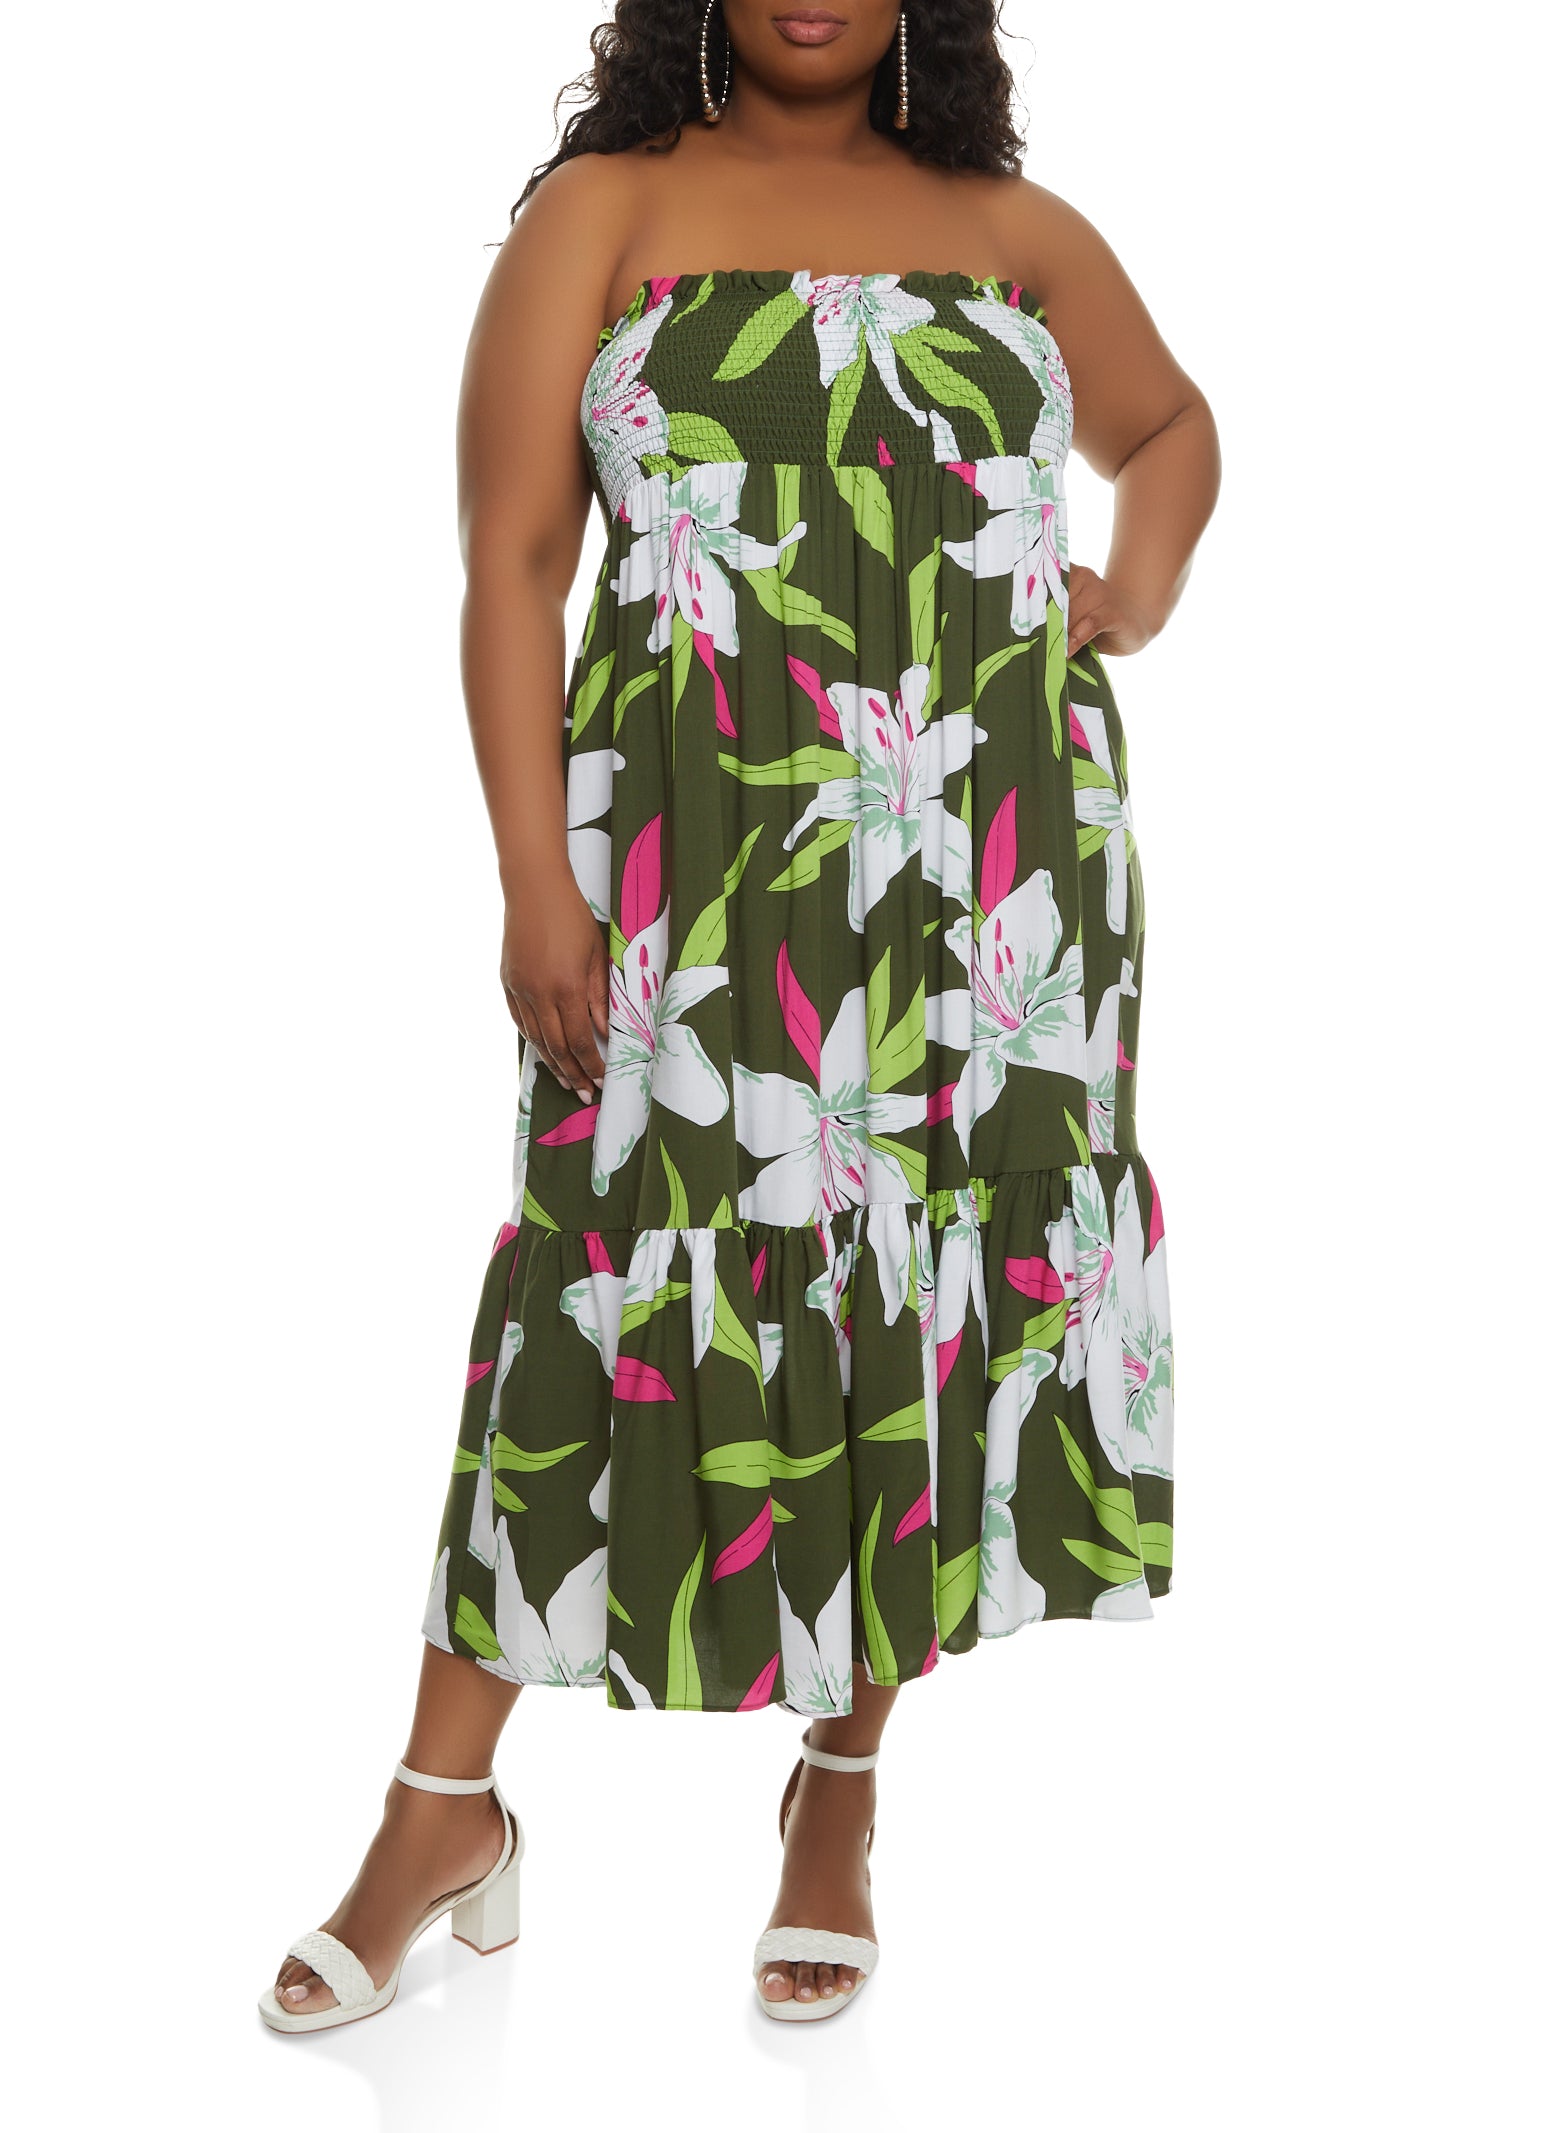 Swimsuits For All Women's Plus Size Strapless Smocked Maxi Dress